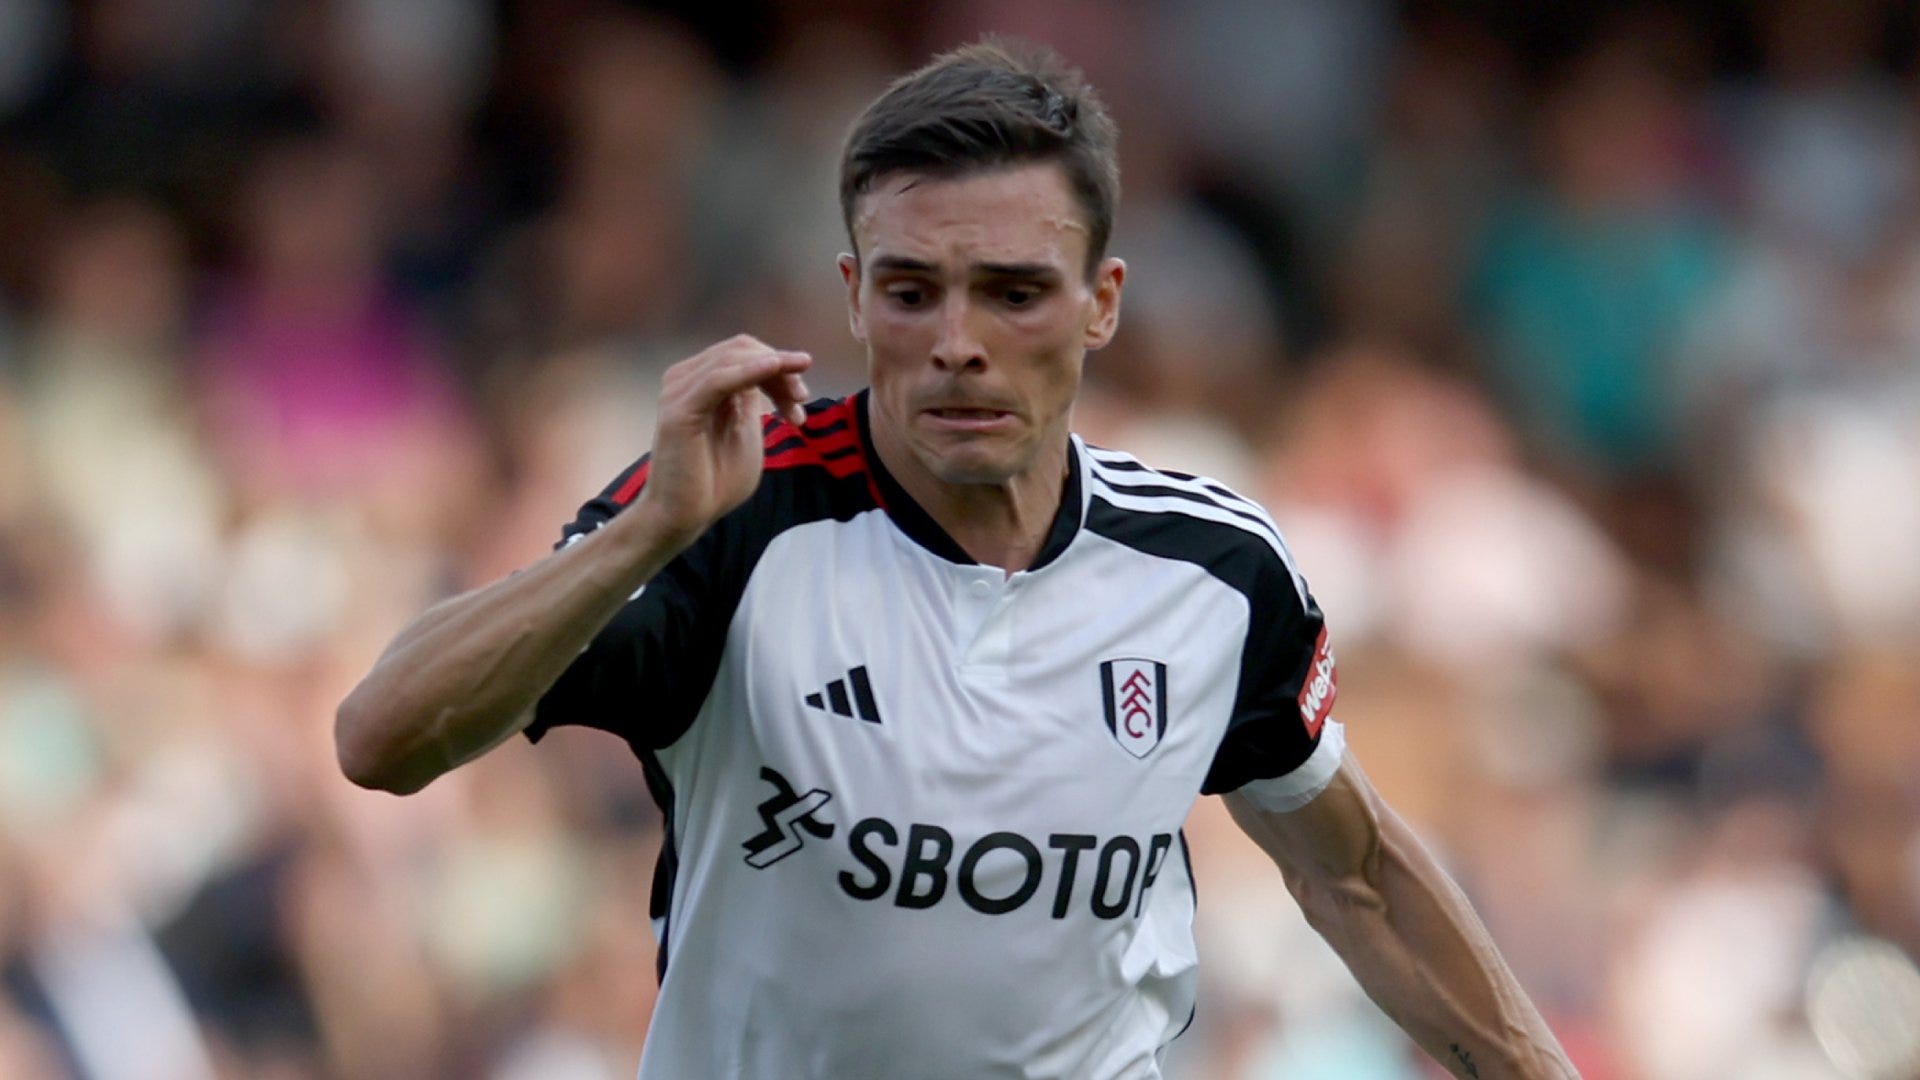 Fulham vs Sheffield United Live stream, TV channel, kick-off time and where to watch Goal UK